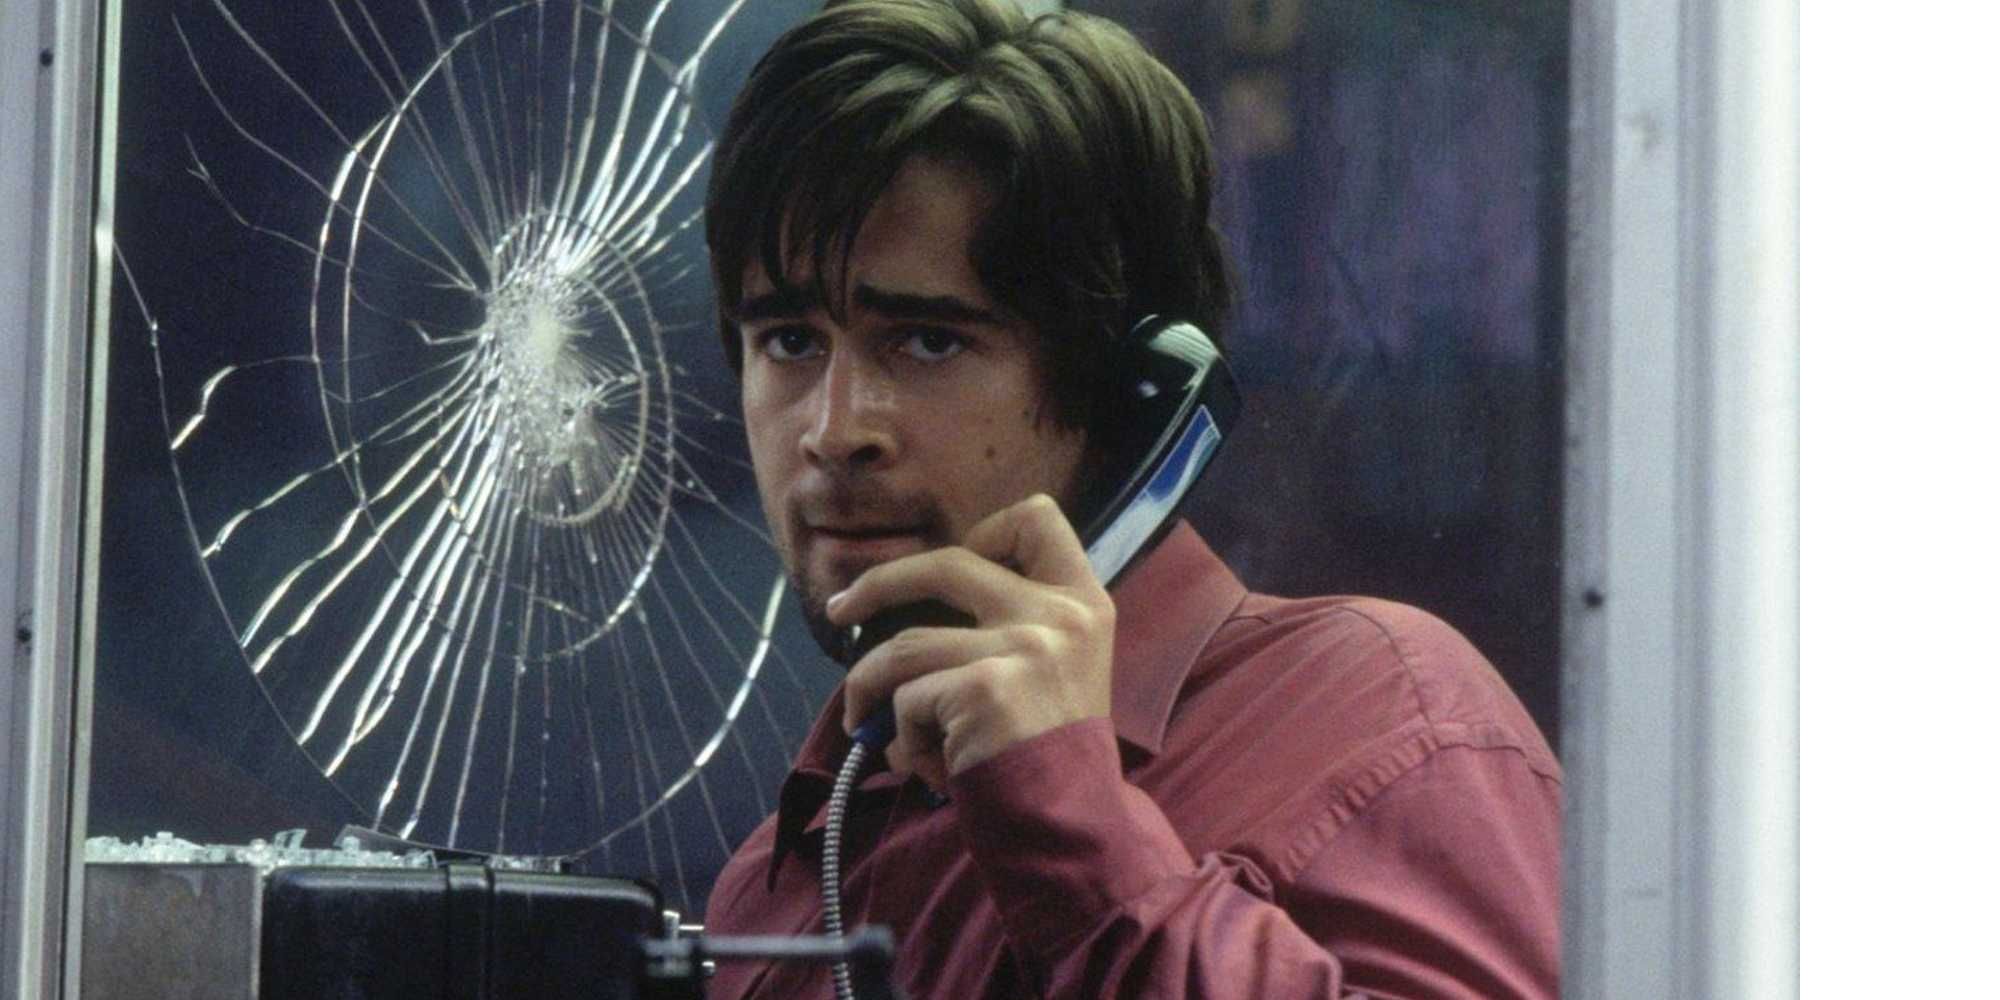 Colin Farrell as Stu Shpeard inside a booth holding a phone to his ear and looking scared in Phone Booth